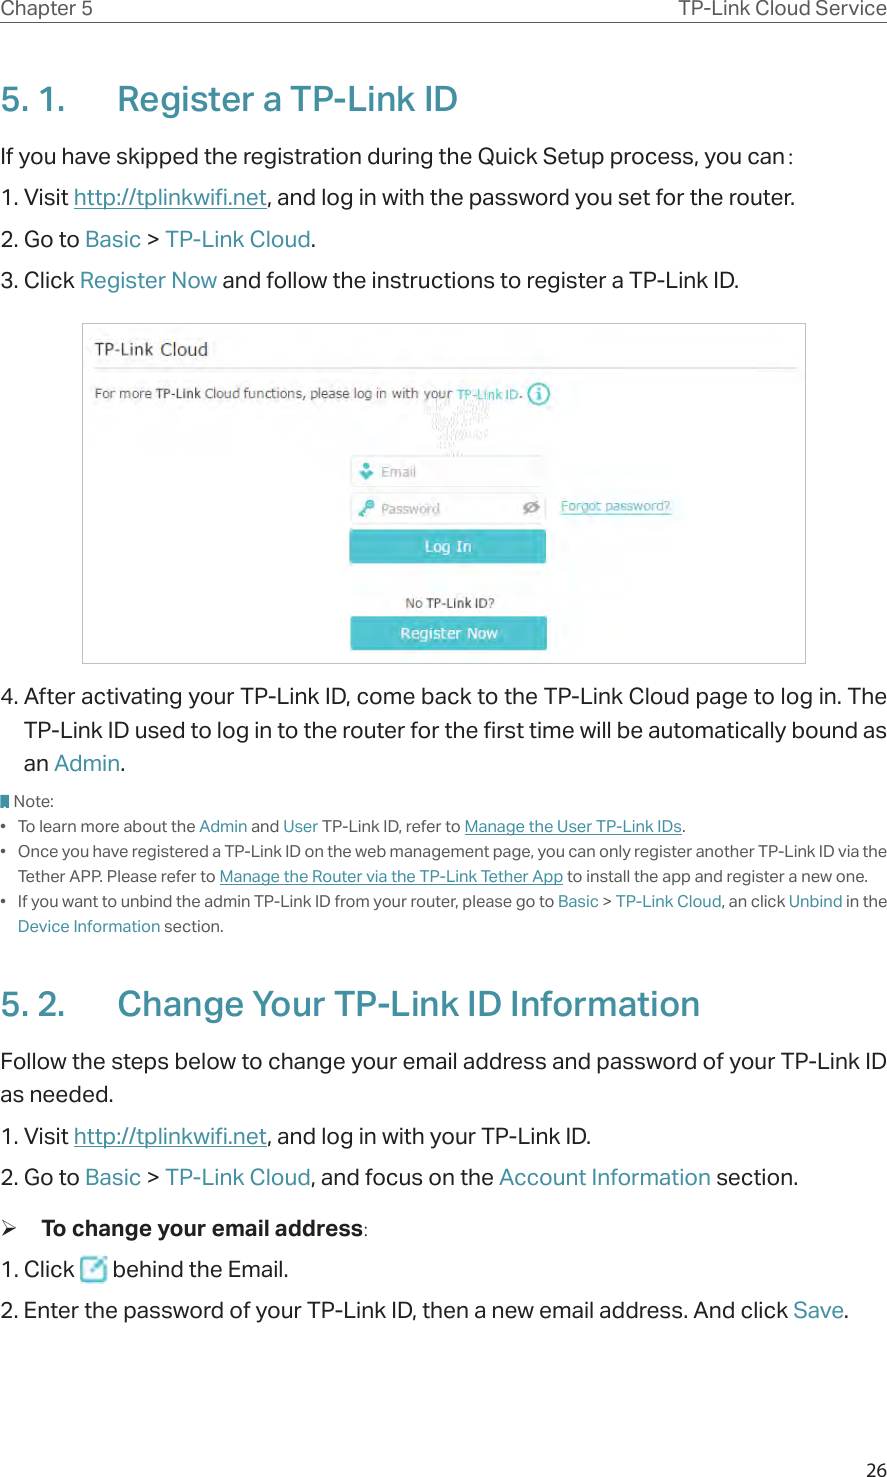 26Chapter 5 TP-Link Cloud Service5. 1.  Register a TP-Link IDIf you have skipped the registration during the Quick Setup process, you can：1. Visit http://tplinkwifi.net, and log in with the password you set for the router.2. Go to Basic &gt; TP-Link Cloud.3. Click Register Now and follow the instructions to register a TP-Link ID.4. After activating your TP-Link ID, come back to the TP-Link Cloud page to log in. The TP-Link ID used to log in to the router for the first time will be automatically bound as an Admin. Note:•  To learn more about the Admin and User TP-Link ID, refer to Manage the User TP-Link IDs.•  Once you have registered a TP-Link ID on the web management page, you can only register another TP-Link ID via the Tether APP. Please refer to Manage the Router via the TP-Link Tether App to install the app and register a new one.•  If you want to unbind the admin TP-Link ID from your router, please go to Basic &gt; TP-Link Cloud, an click Unbind in the Device Information section.5. 2.  Change Your TP-Link ID InformationFollow the steps below to change your email address and password of your TP-Link ID as needed.1. Visit http://tplinkwifi.net, and log in with your TP-Link ID.2. Go to Basic &gt; TP-Link Cloud, and focus on the Account Information section. ¾To change your email address:1. Click   behind the Email.2. Enter the password of your TP-Link ID, then a new email address. And click Save.